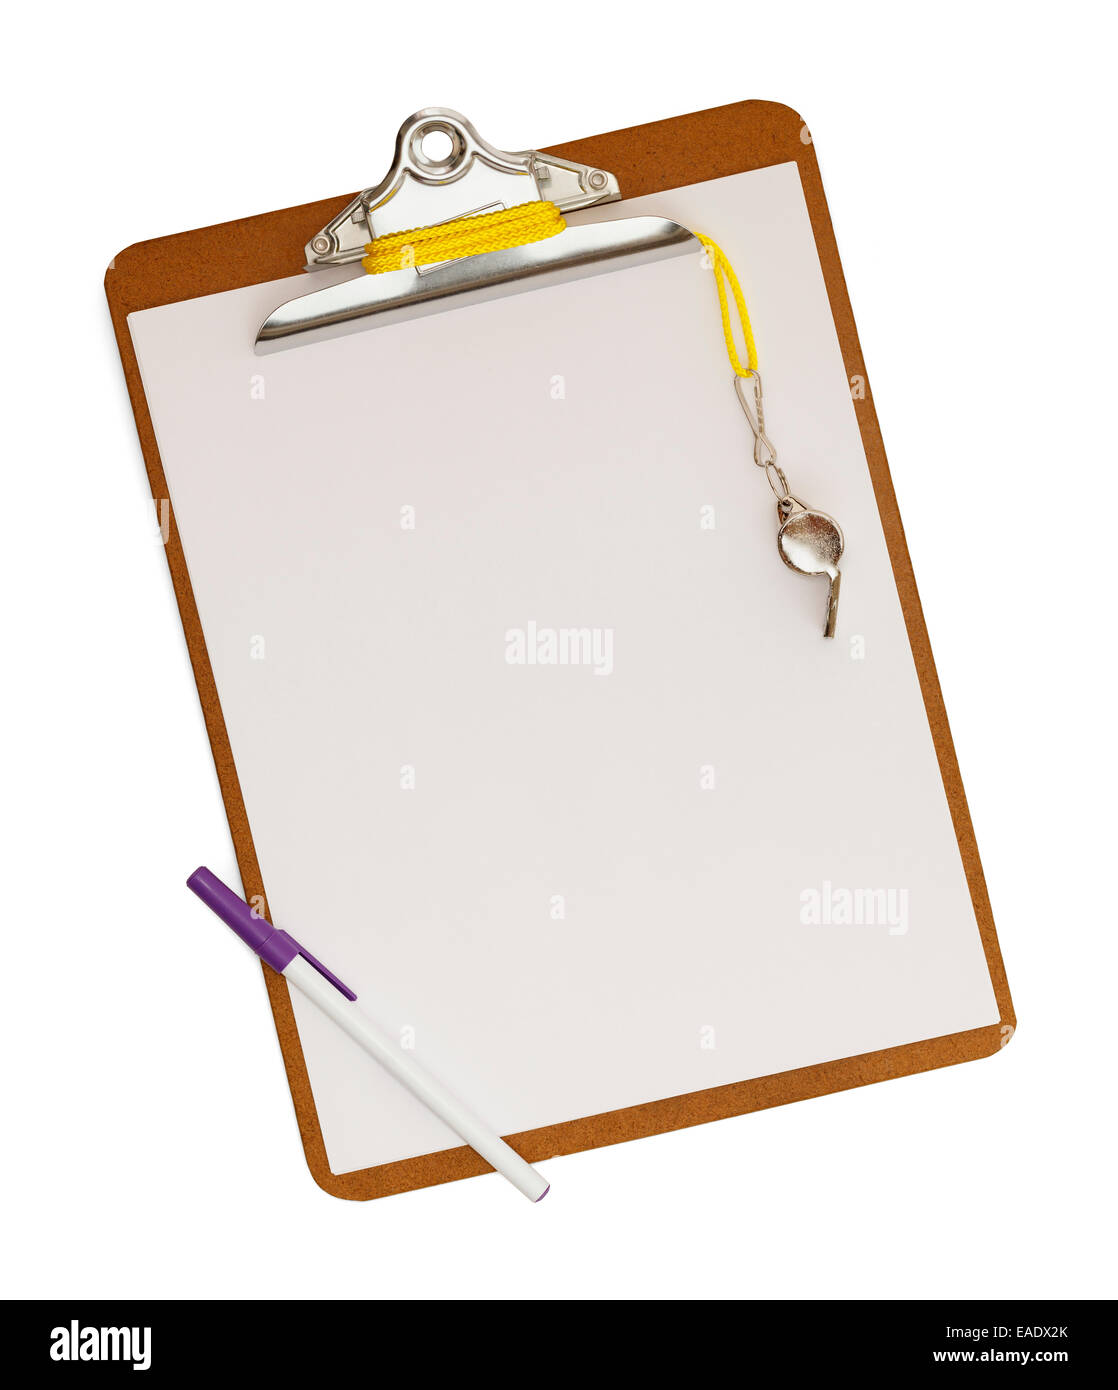 Blank clipboard with whistle on isolated white background. Stock Photo